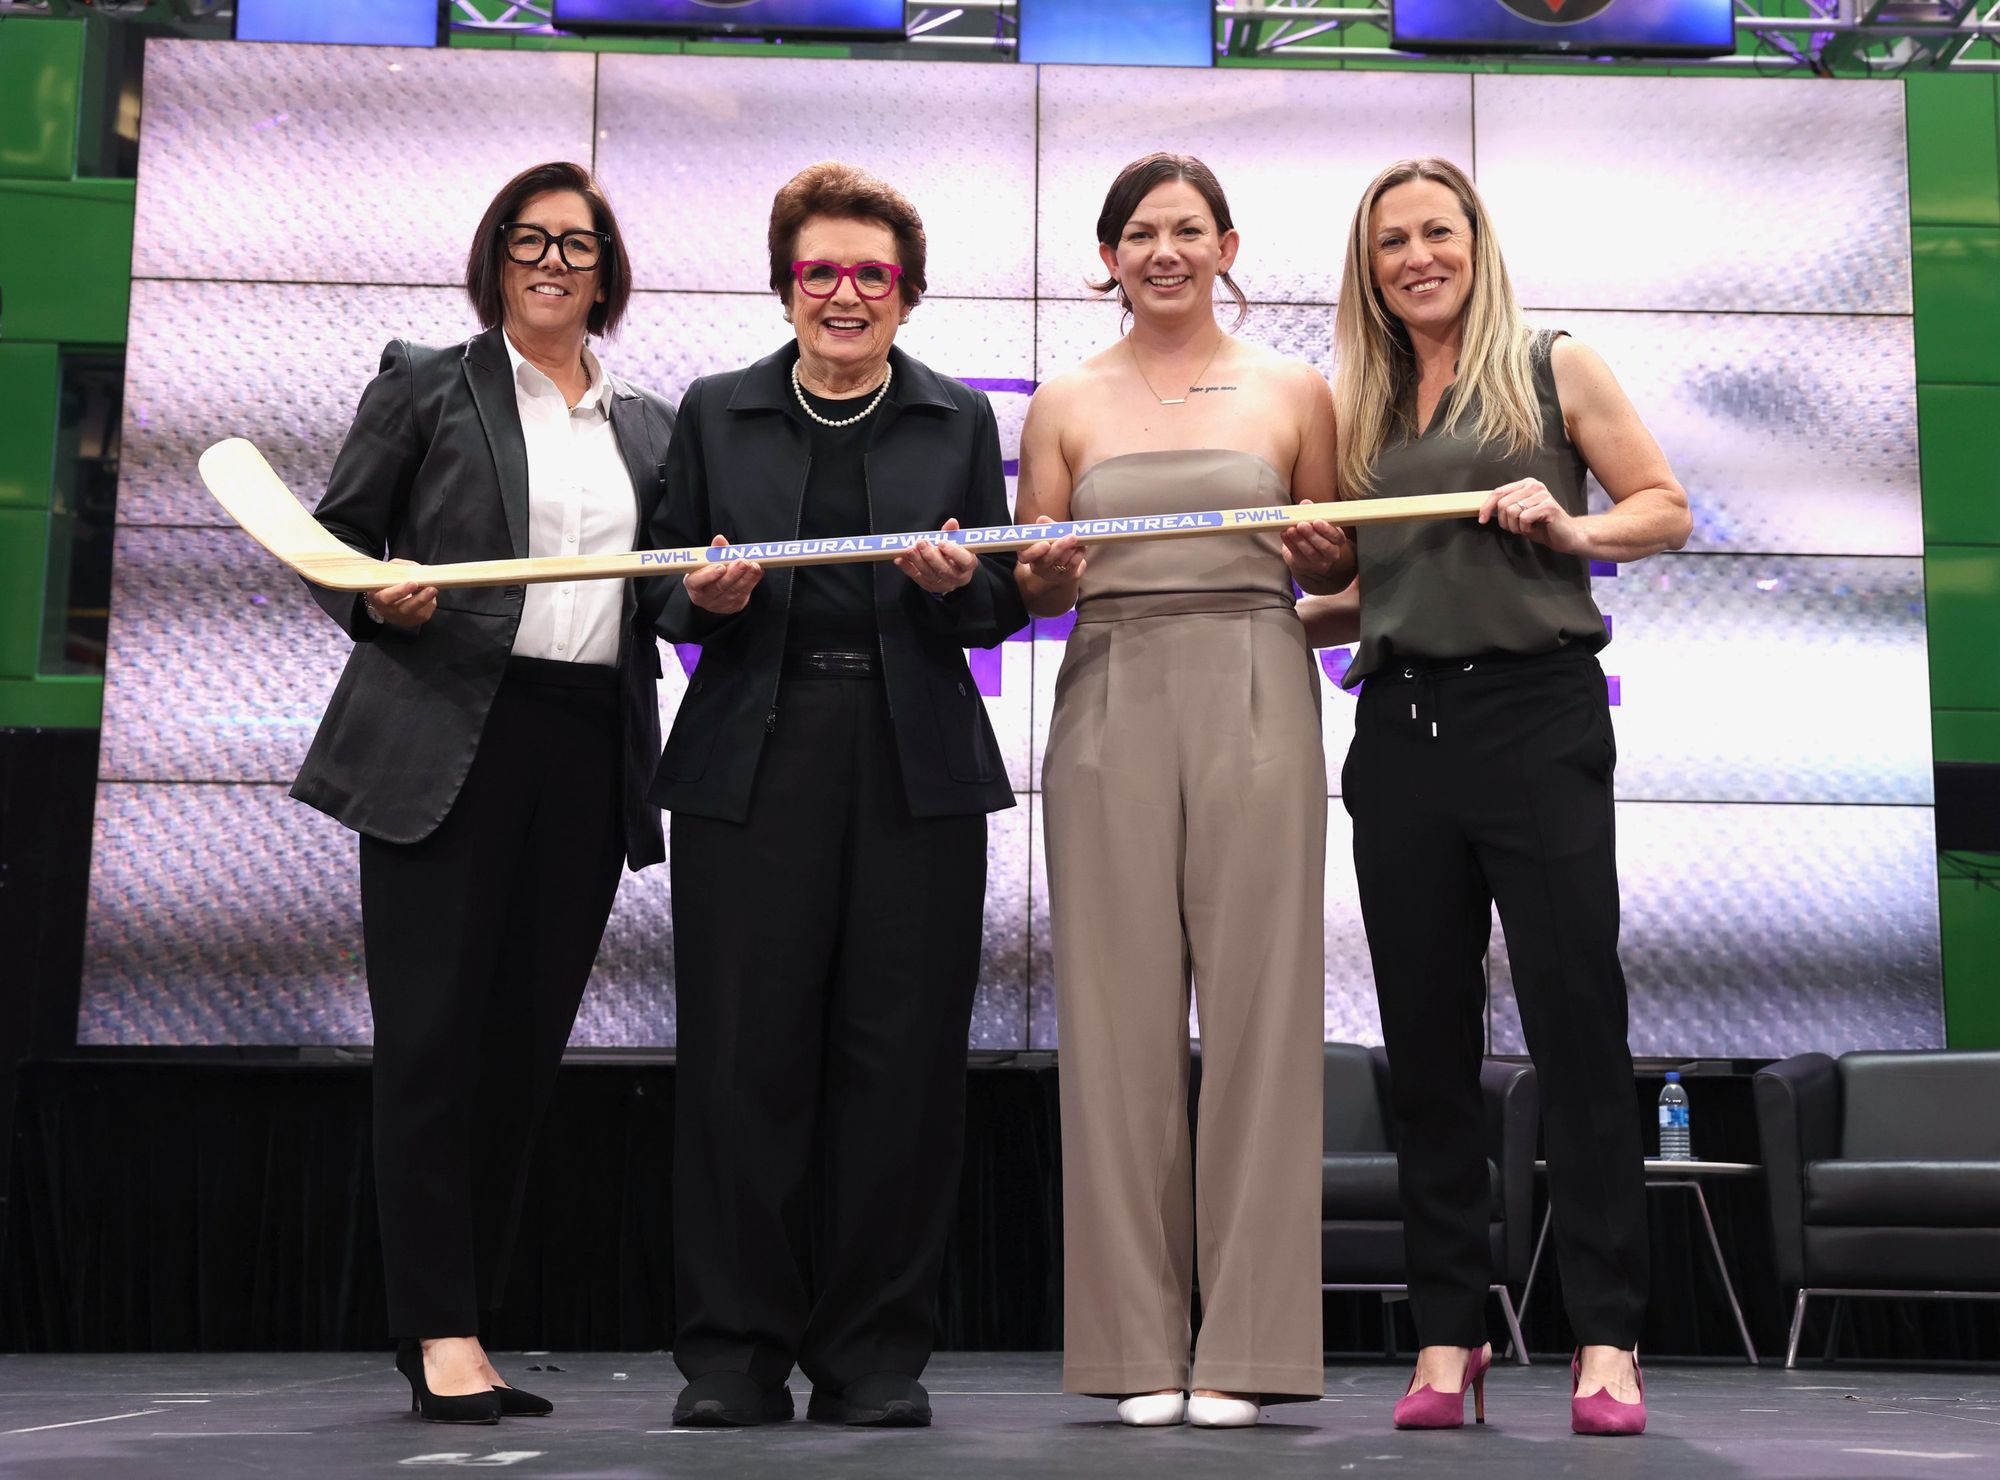 Danièle Sauvageau, Billie Jean King, Erin Ambrose, and Jayna Hefford pose at the PWHL Draft.